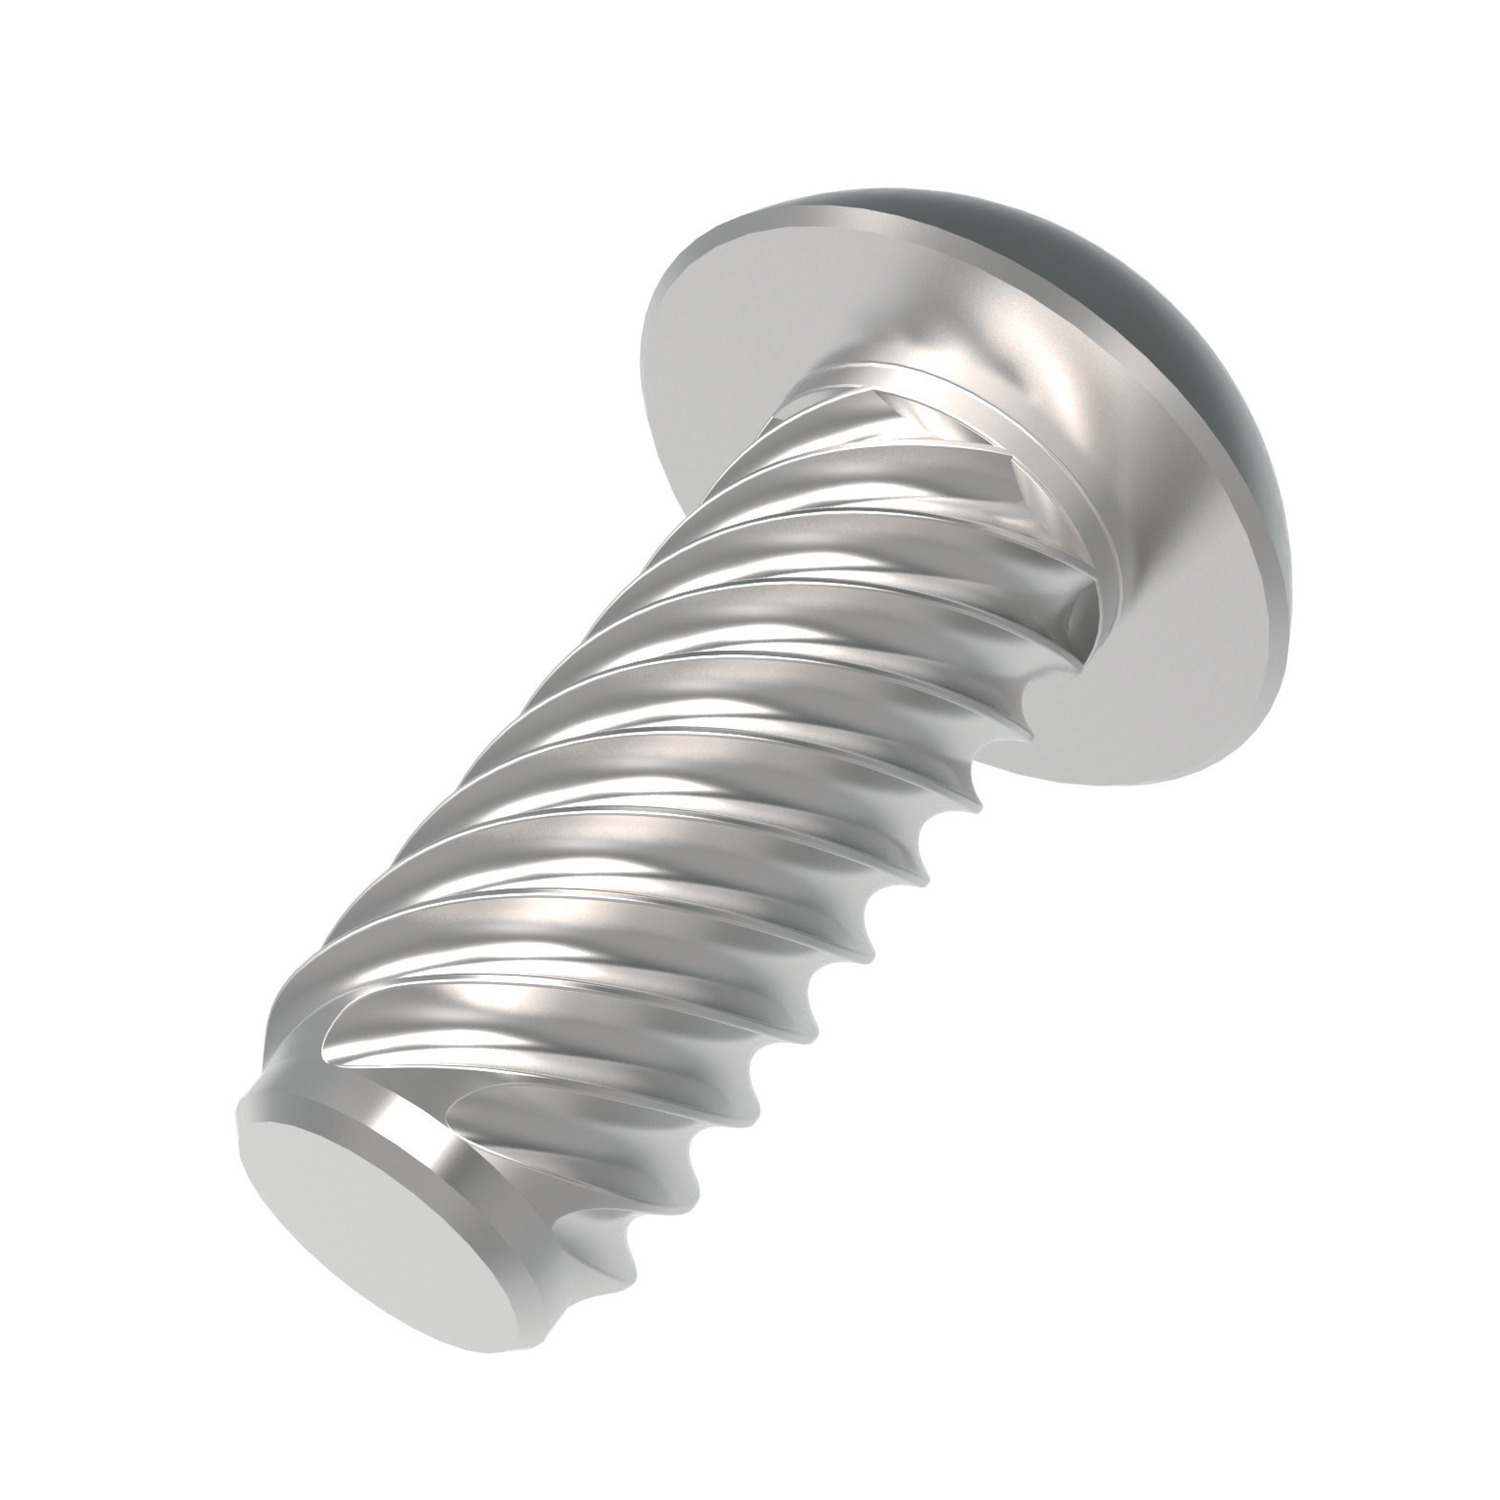 Hammer Drive Pins Hammer drive pins are made from stainless steel and steel.